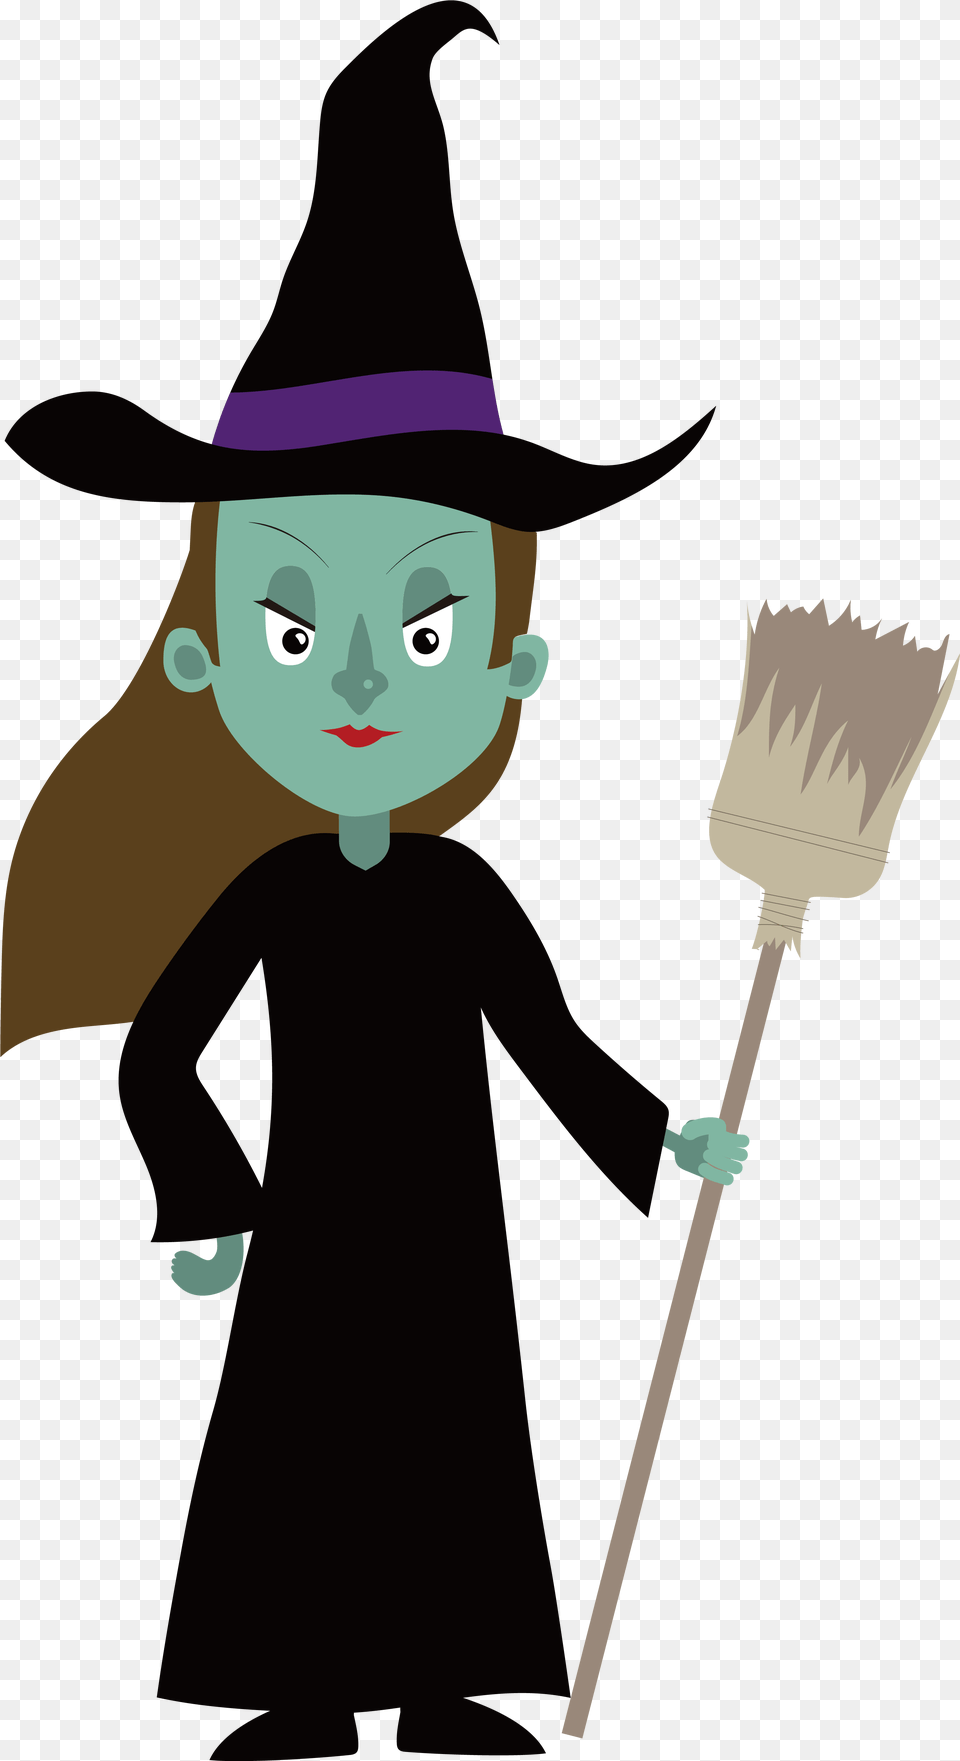 Disguise Halloween Illustration Black Witch Cartoon Witch In Disguise, Baby, Person, Face, Head Free Transparent Png